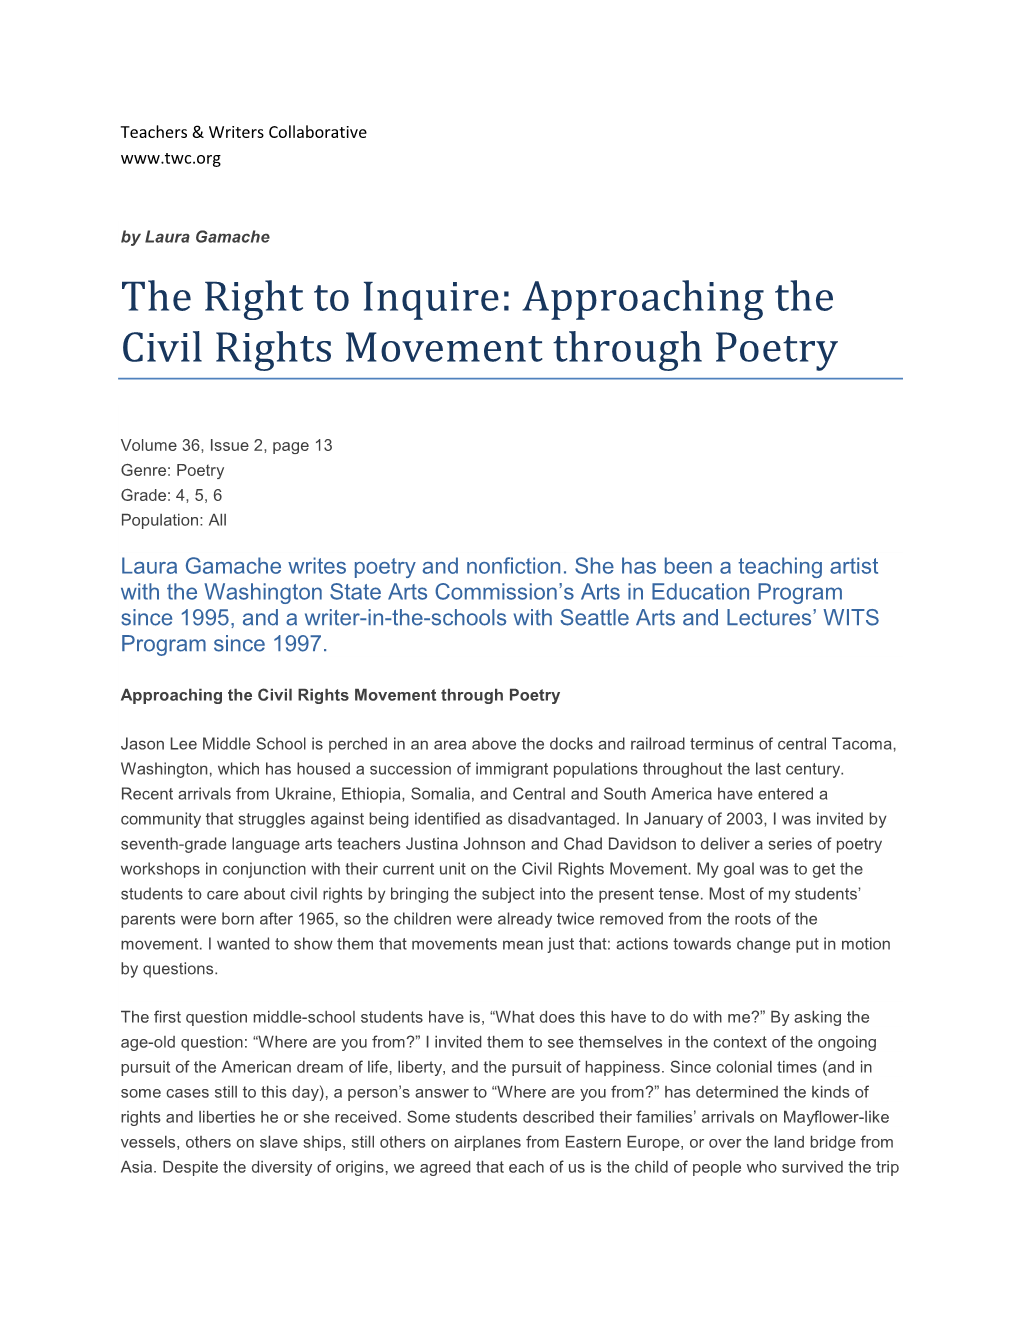 The Right to Inquire: Approaching the Civil Rights Movement Through Poetry